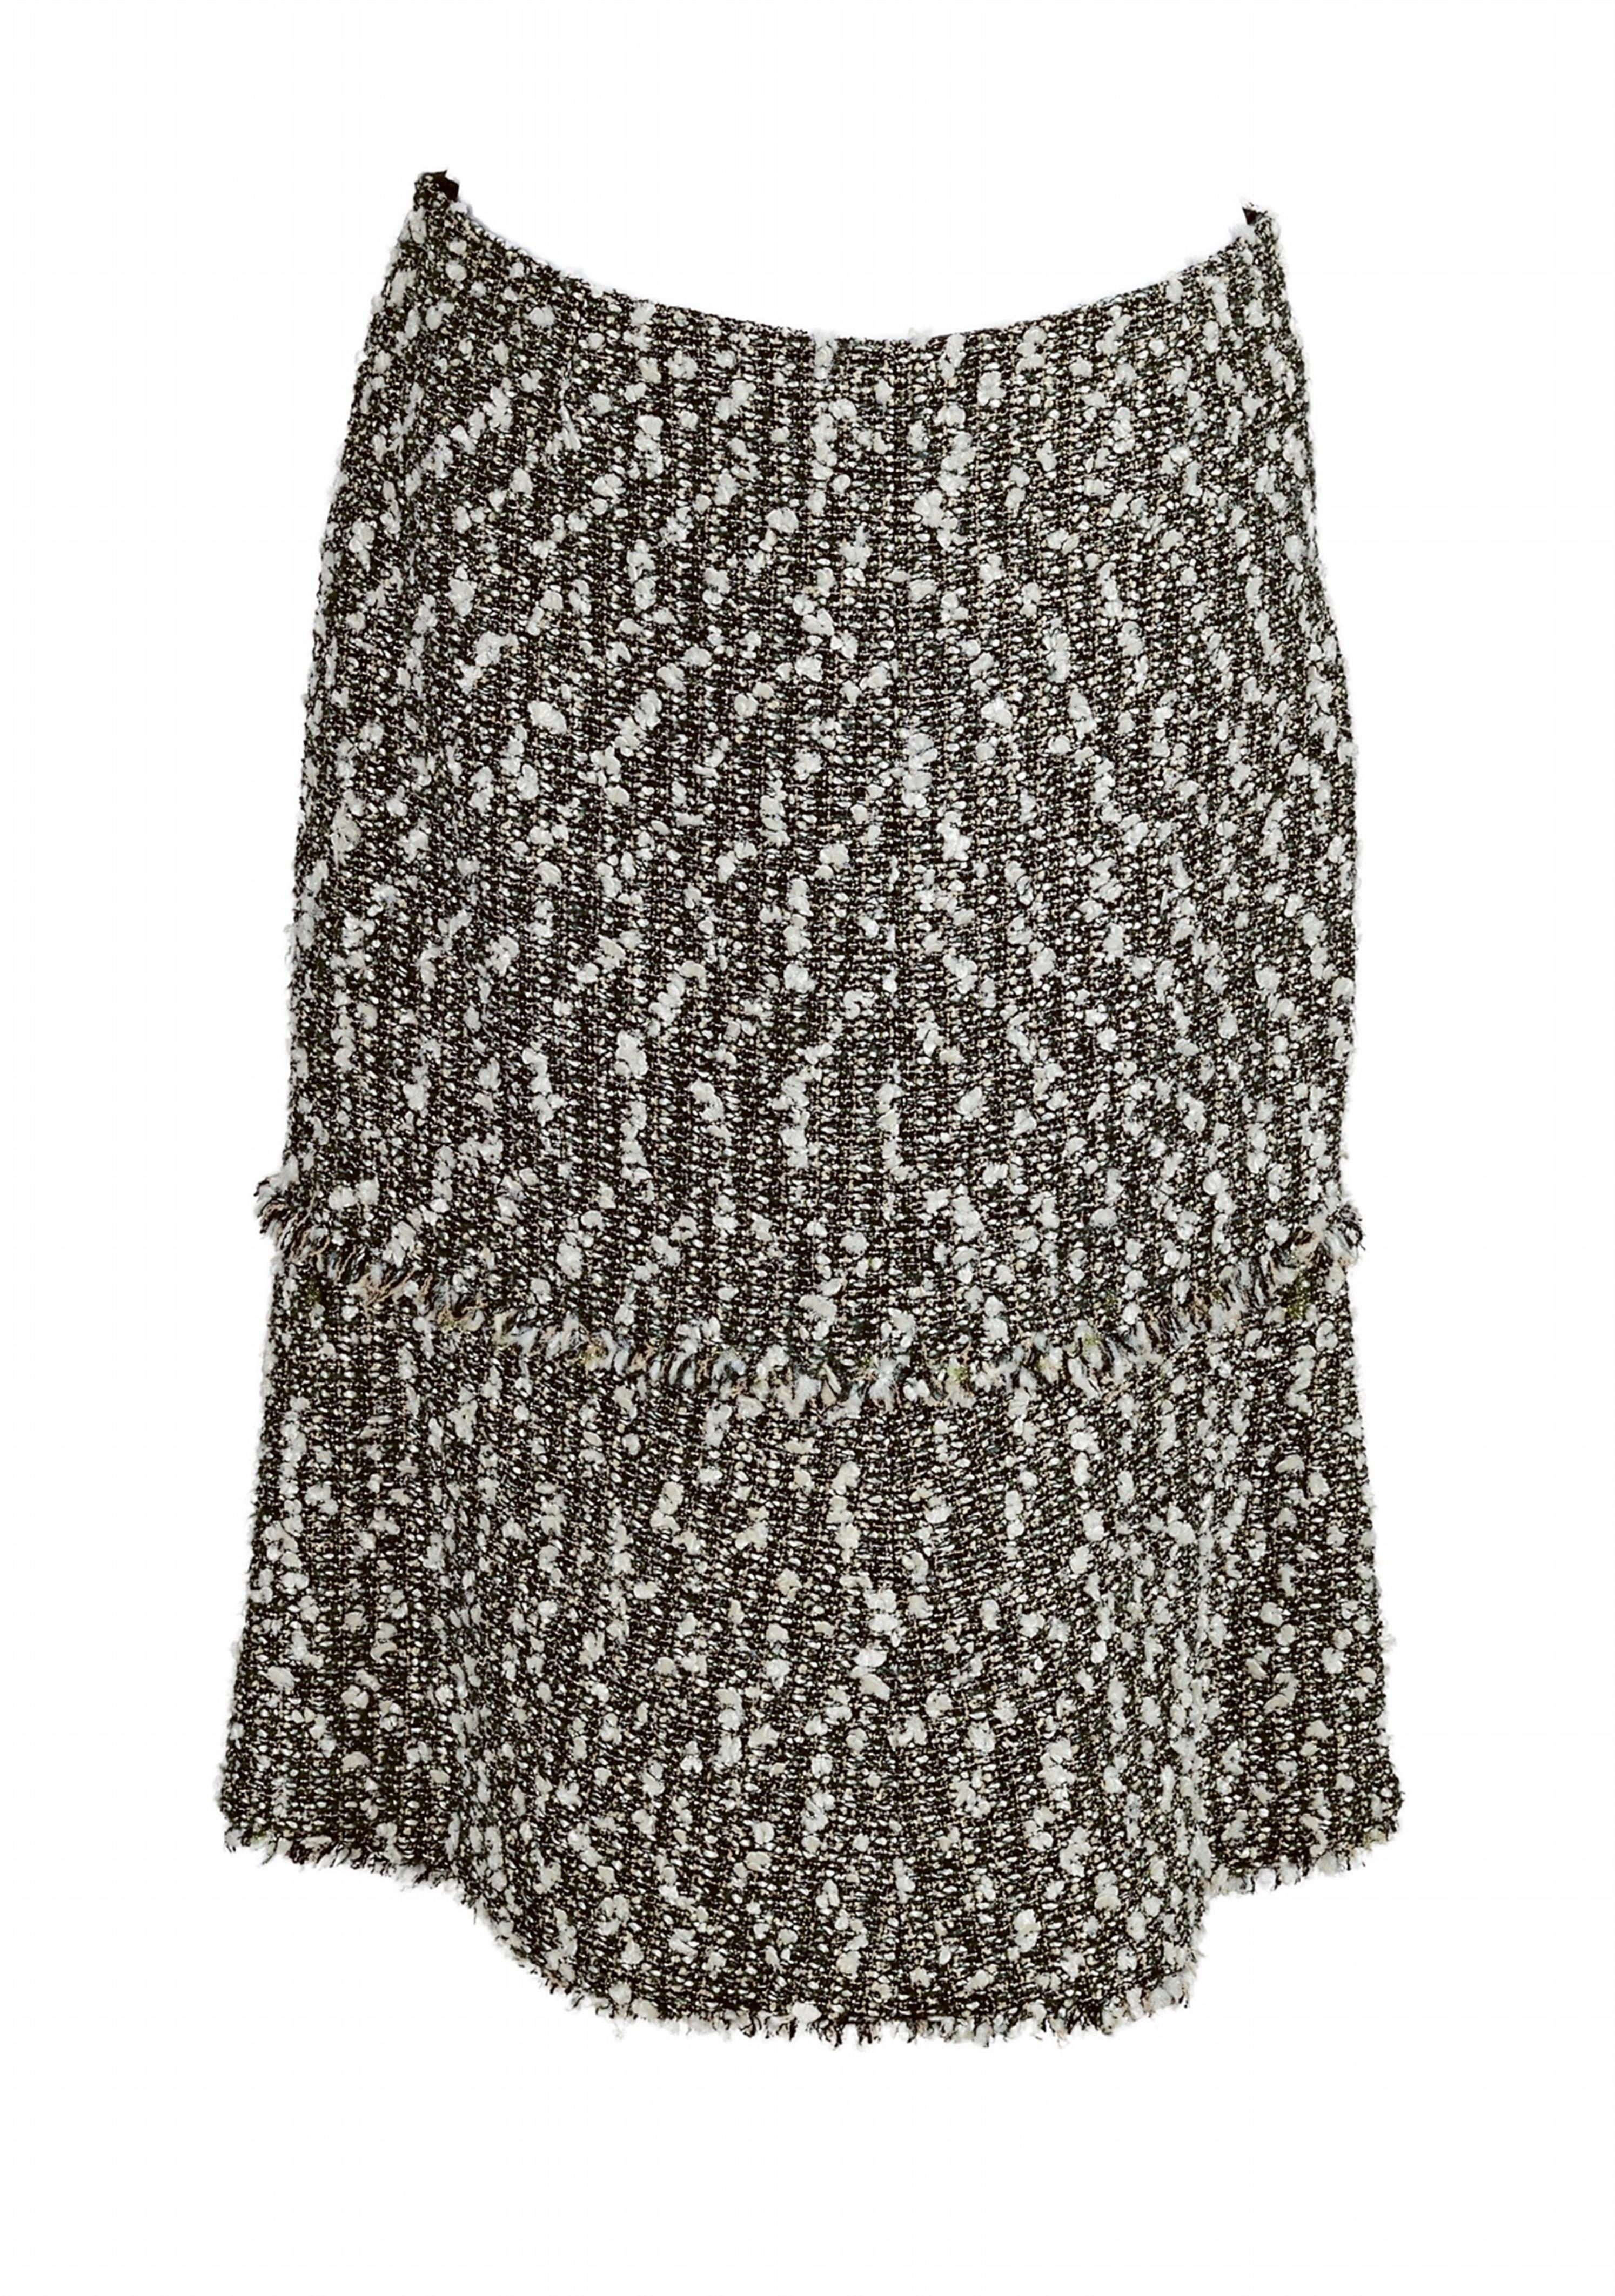 A Chanel skirt, 1990s - image-1